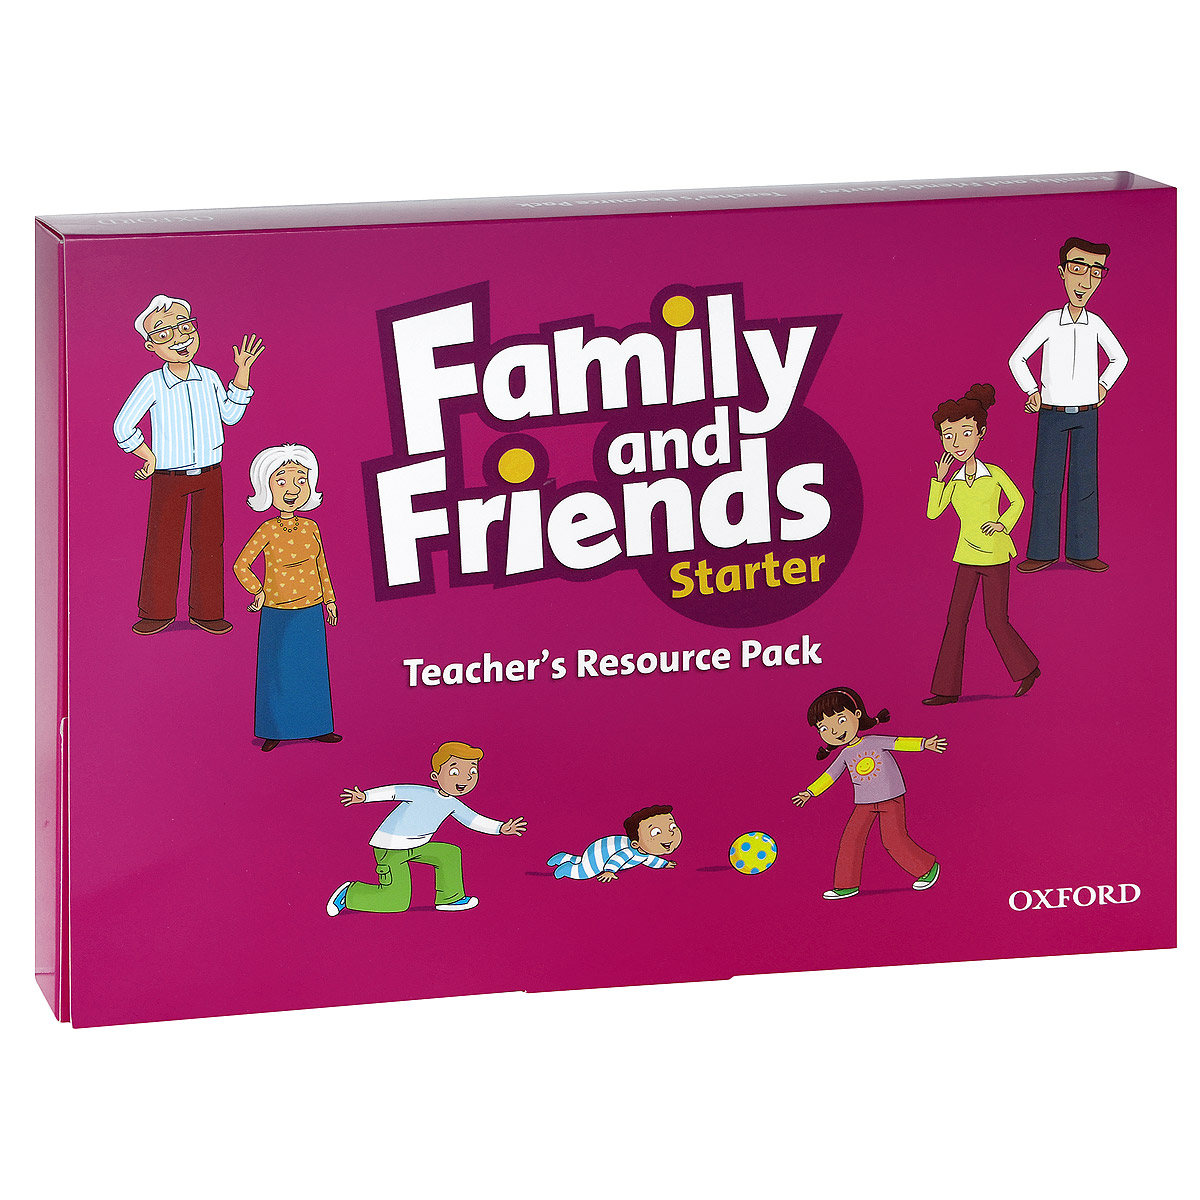 Friends starter book. Family and friends: Starter. Family and friends Starter книга. Фэмили энд френдс стартер. Family and friends Starter карточки.